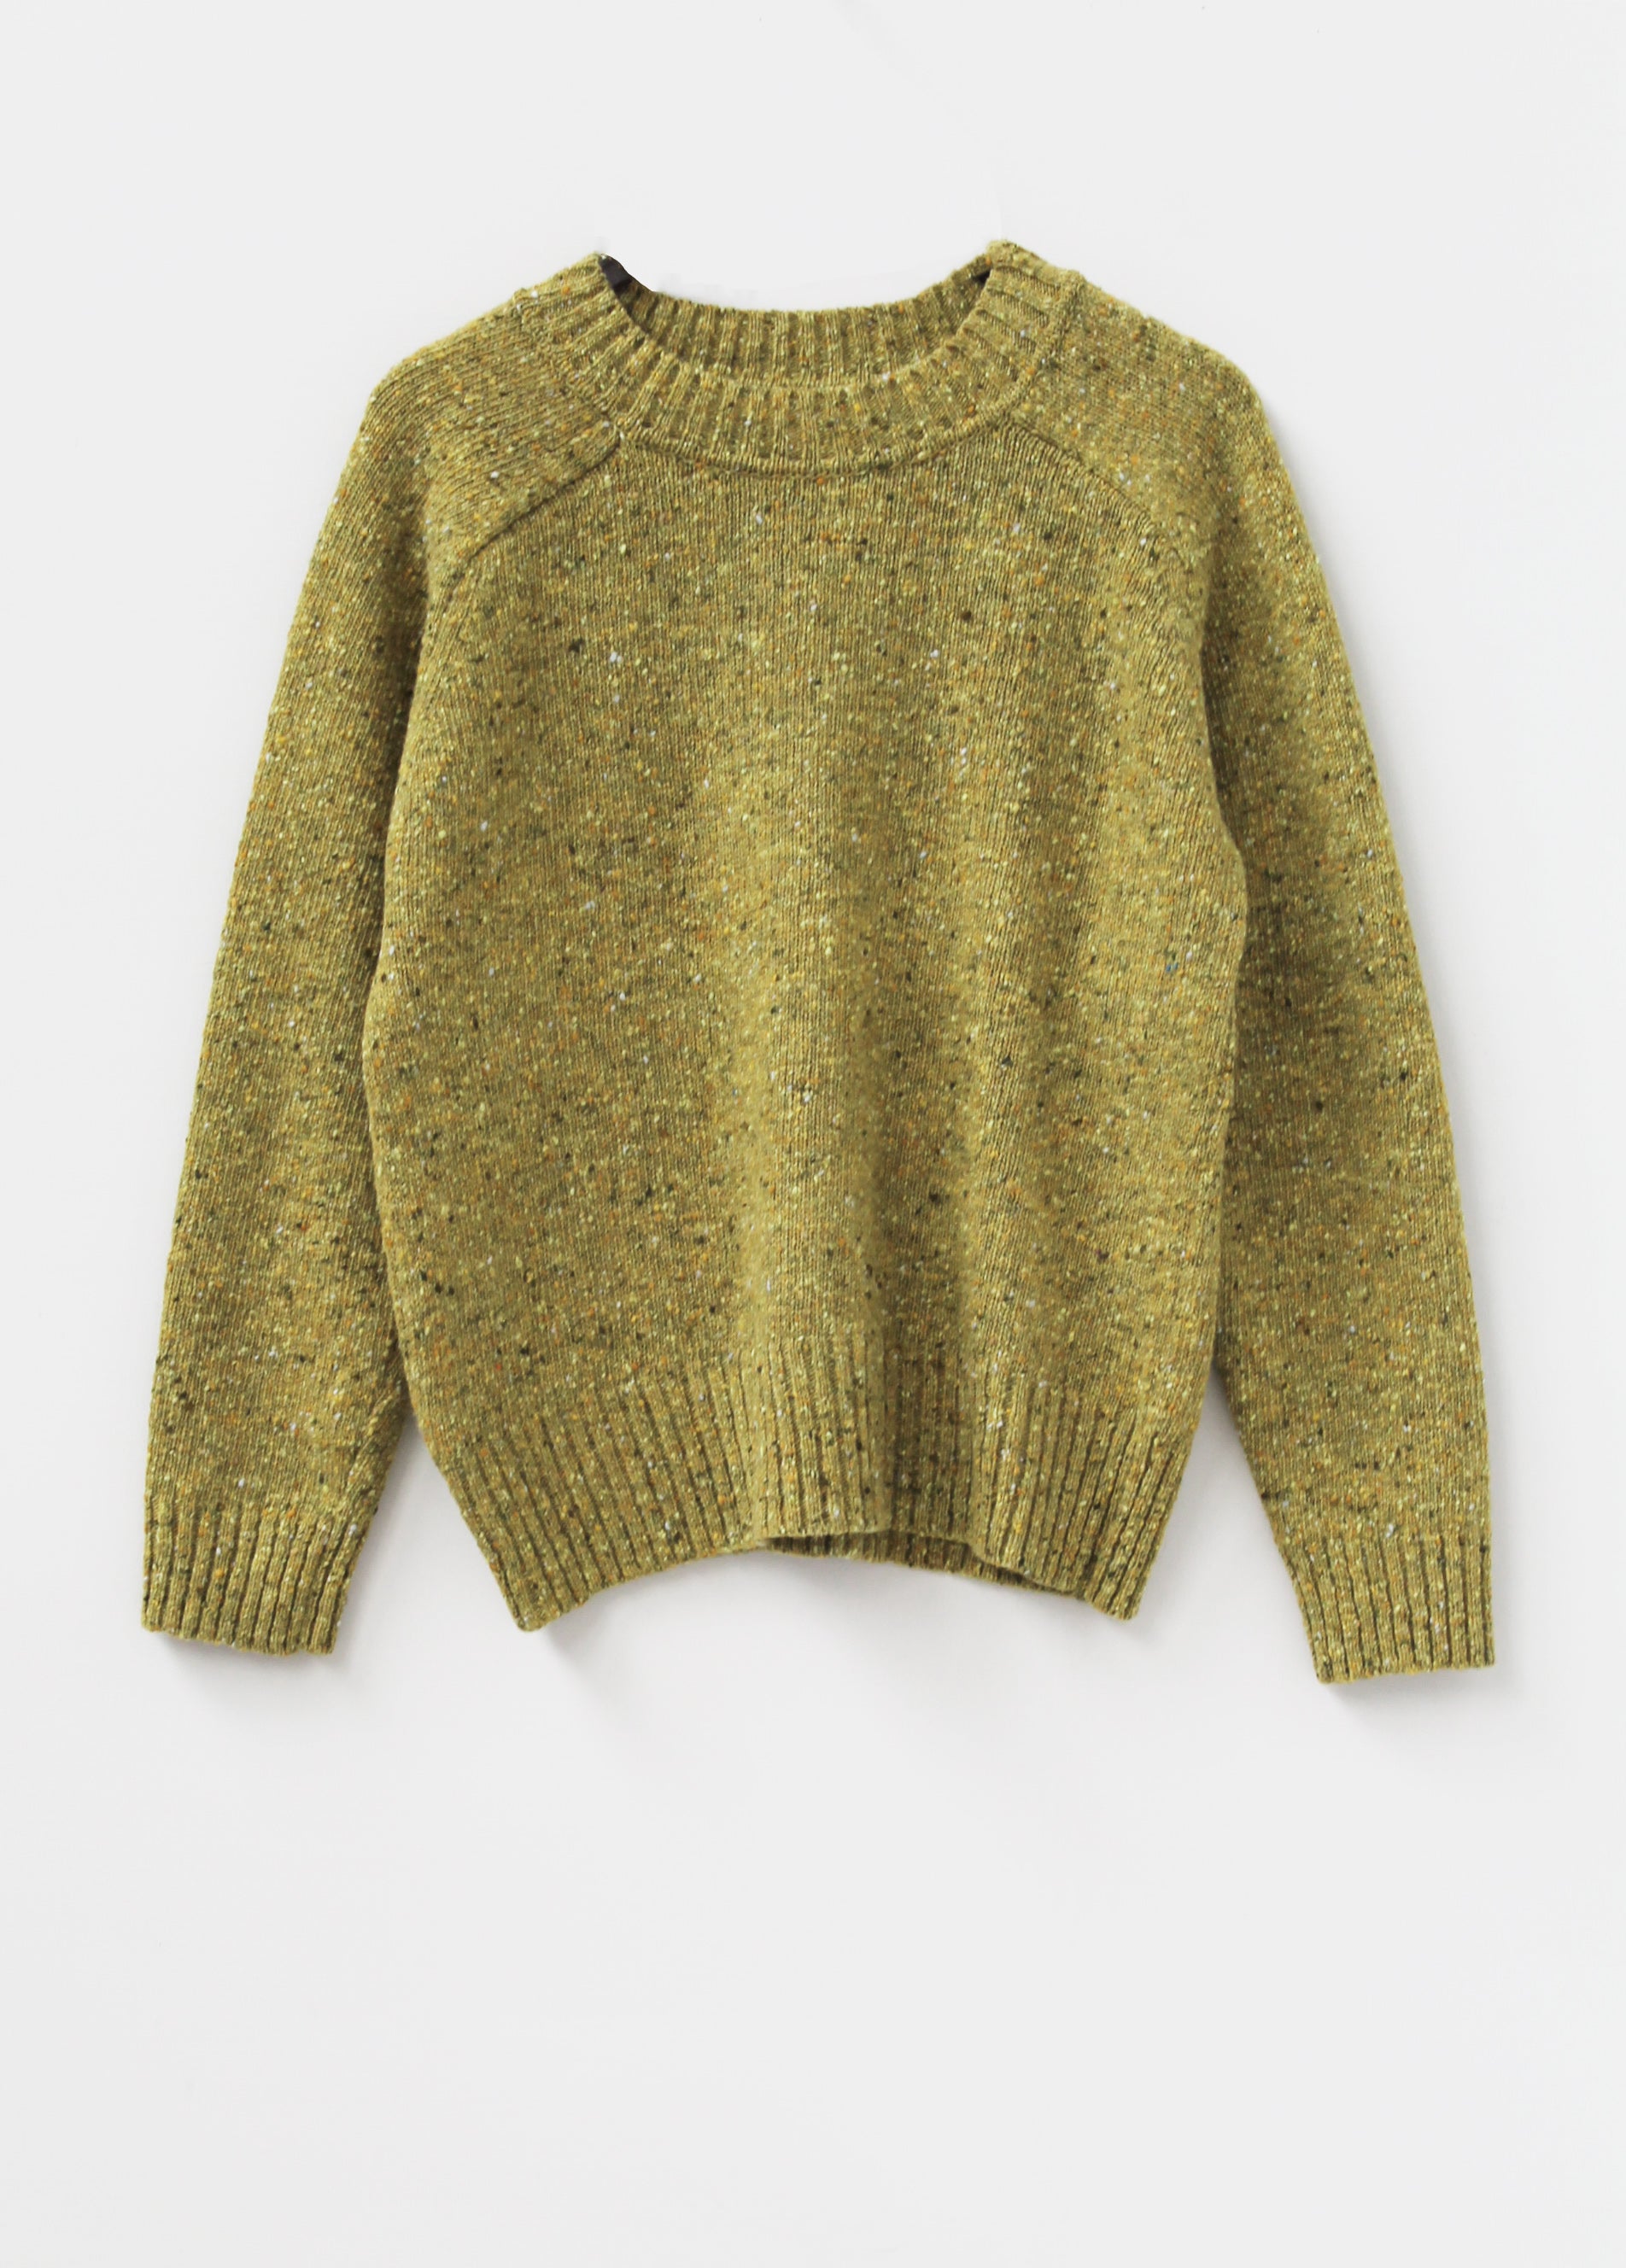 Donegal Merino Wool Sweater in Lime – OUBAS